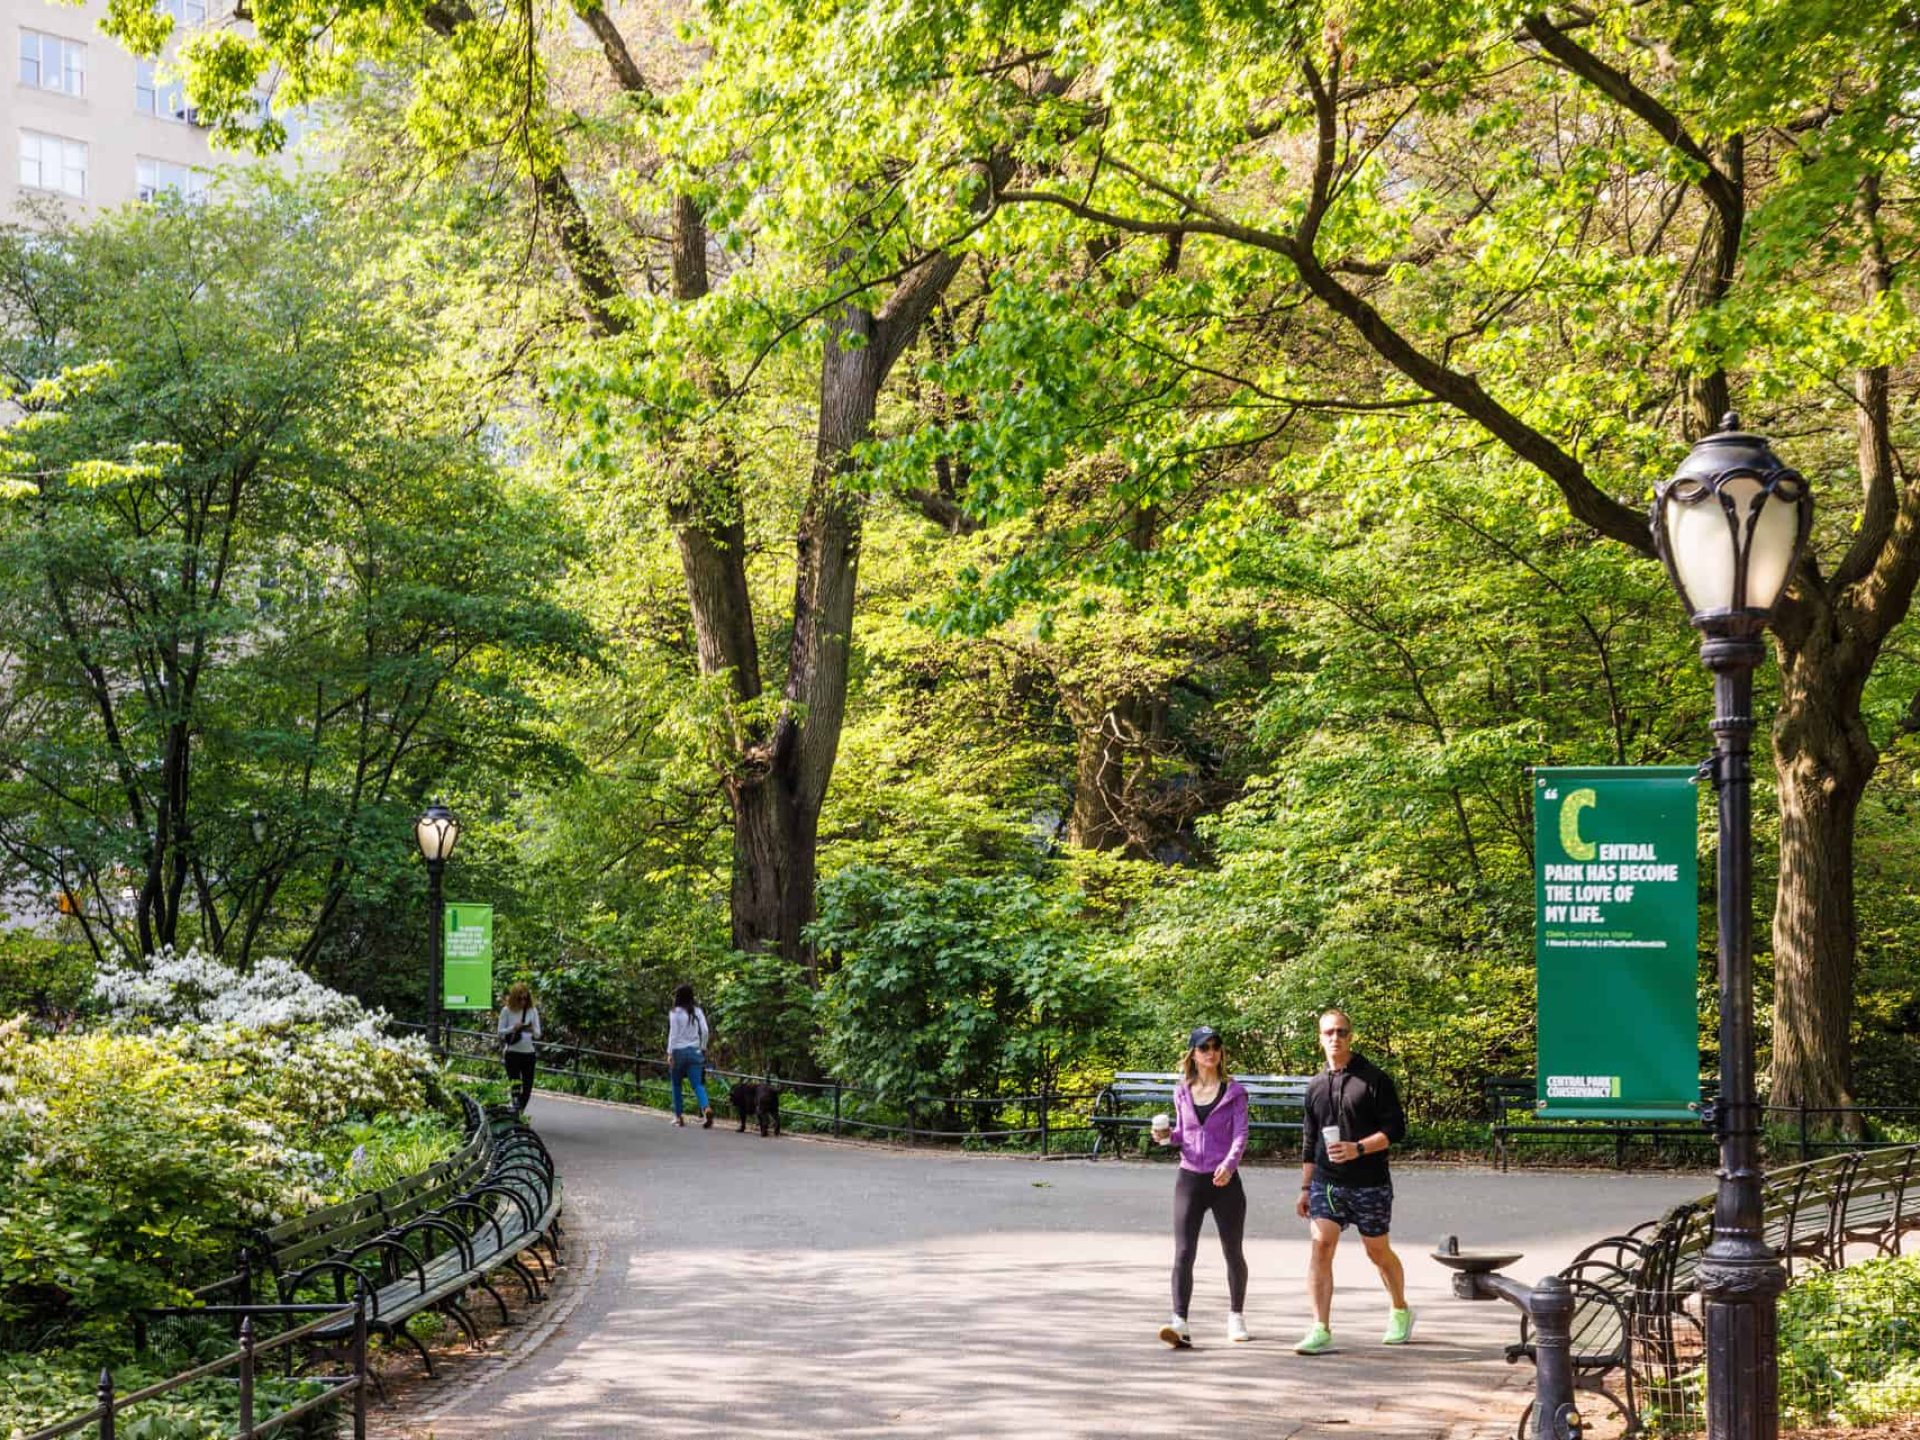 People walking on the stone paths in Central Park lined by railings with benches and trees & shrubs all around.